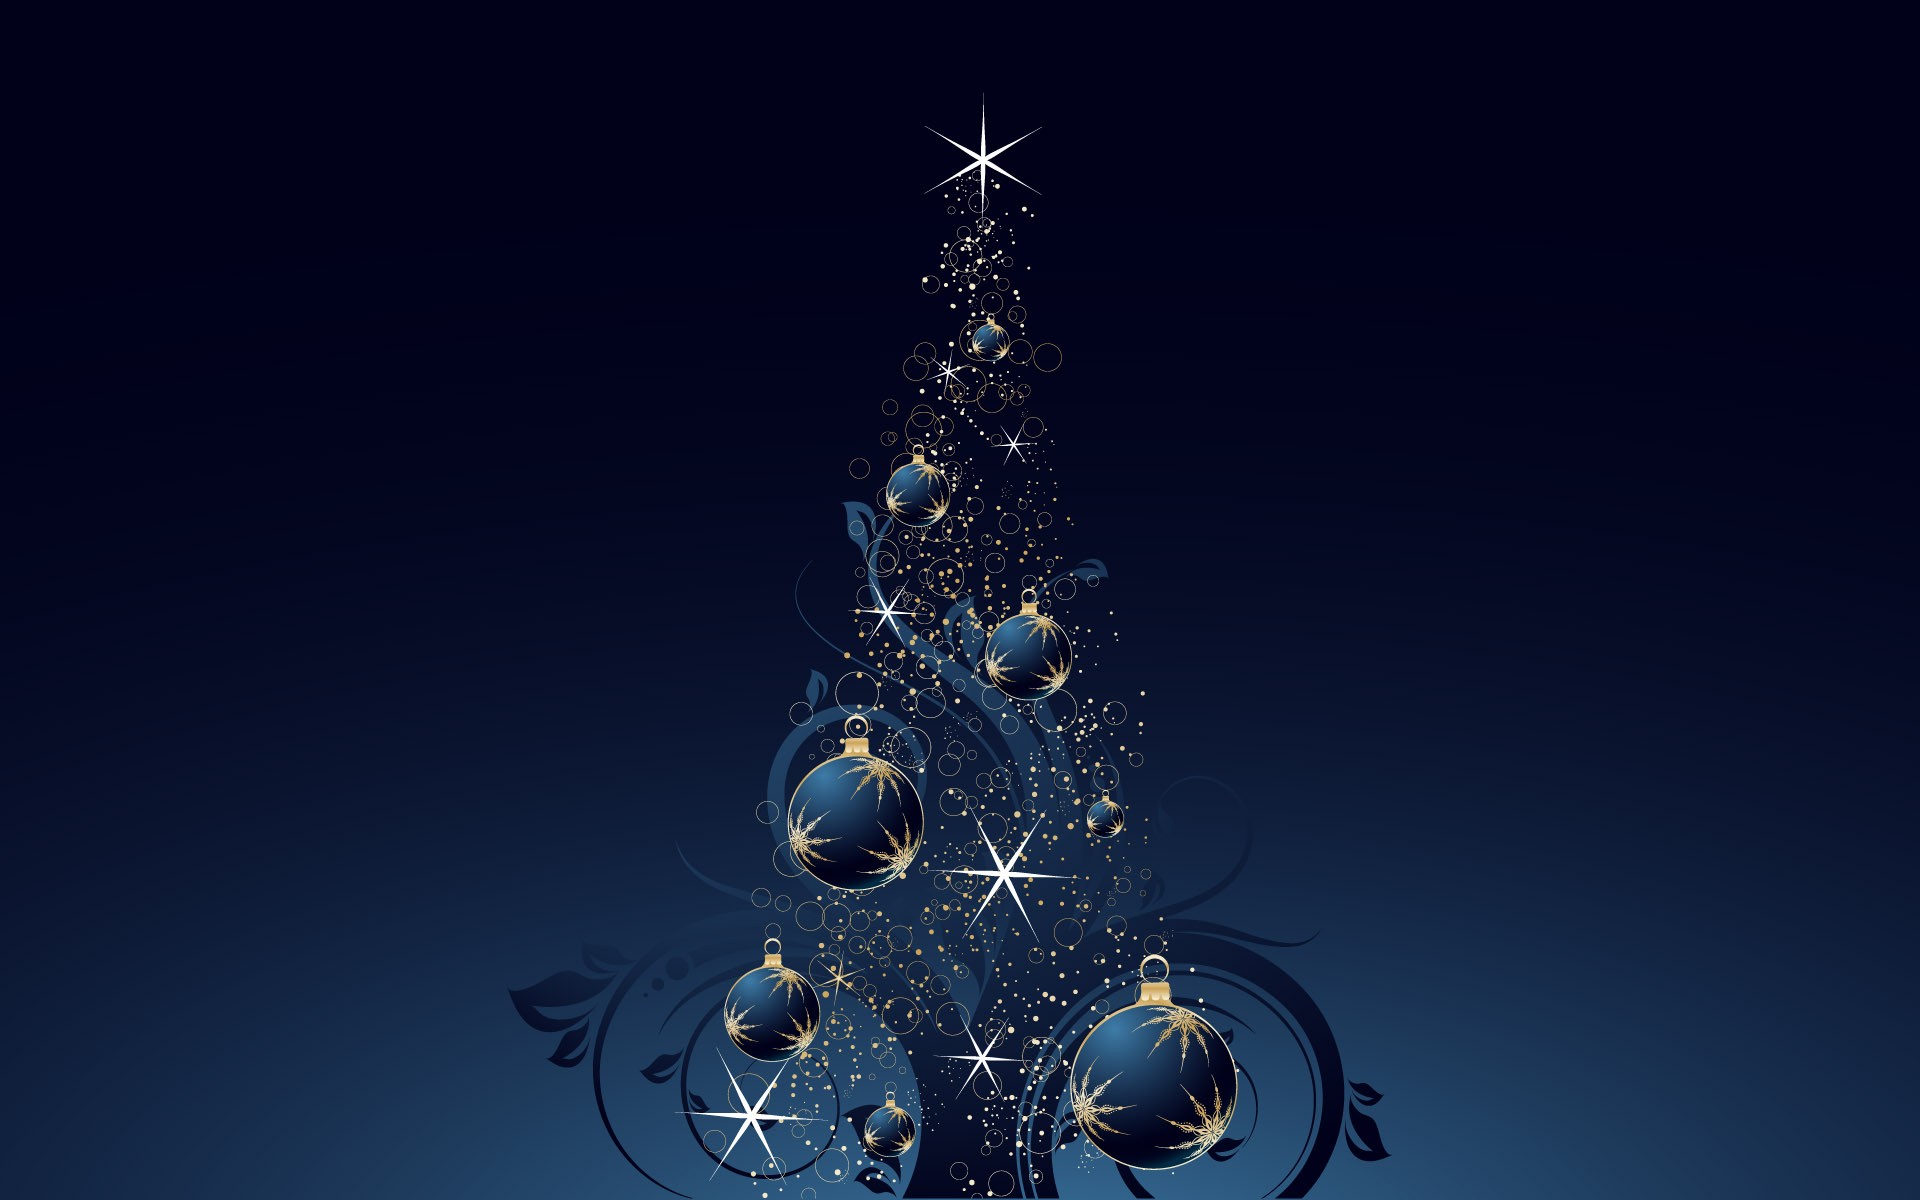 Exquisite Christmas Theme HD Wallpapers #37 - 1920x1200